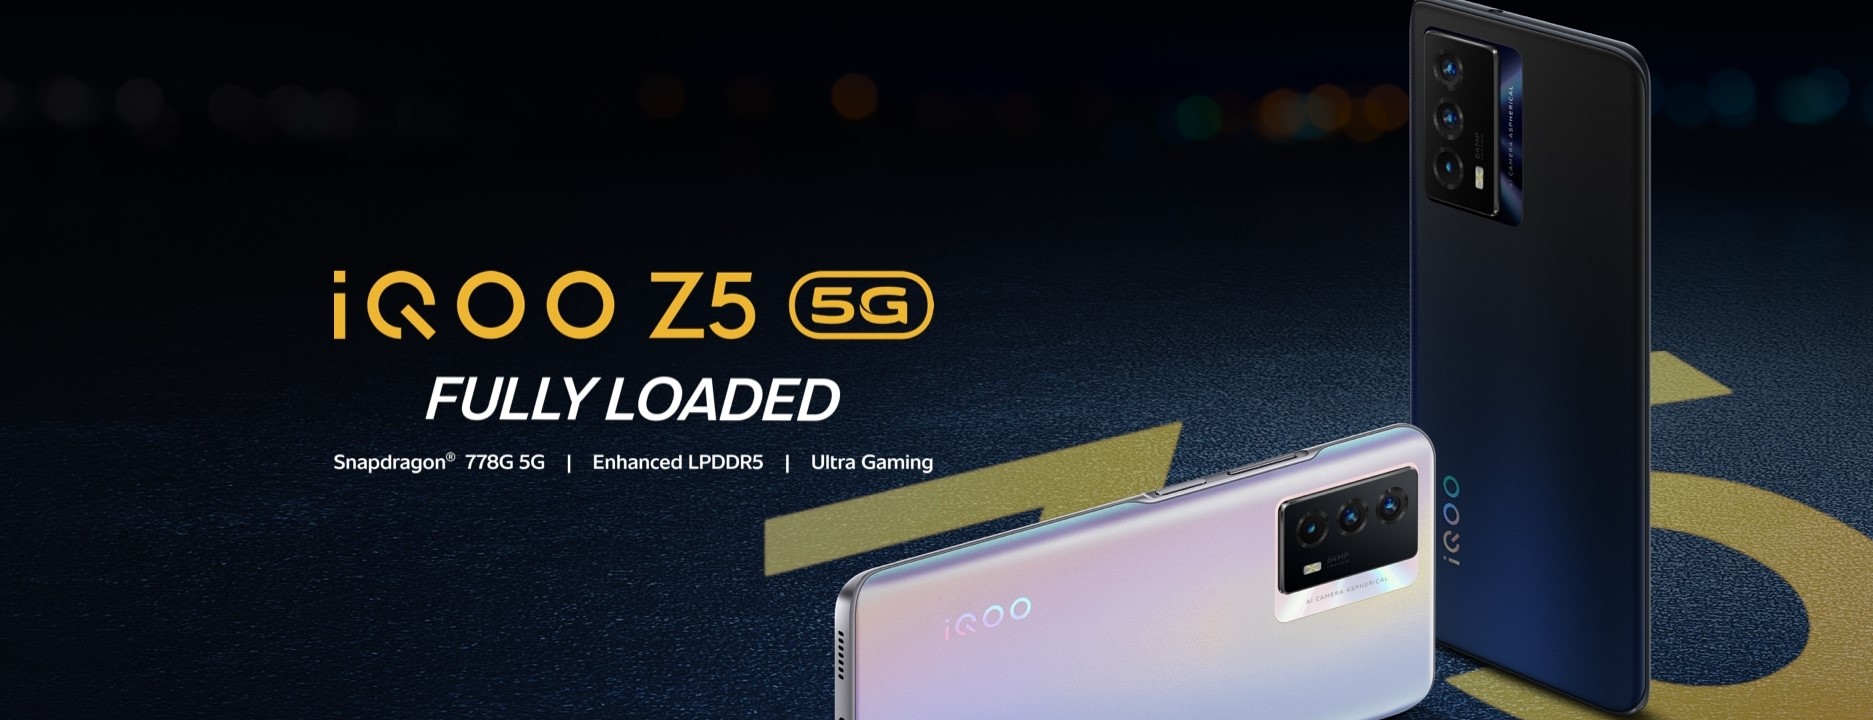 iQOO Z5 5G - best mid-range gaming smartphone with 5G